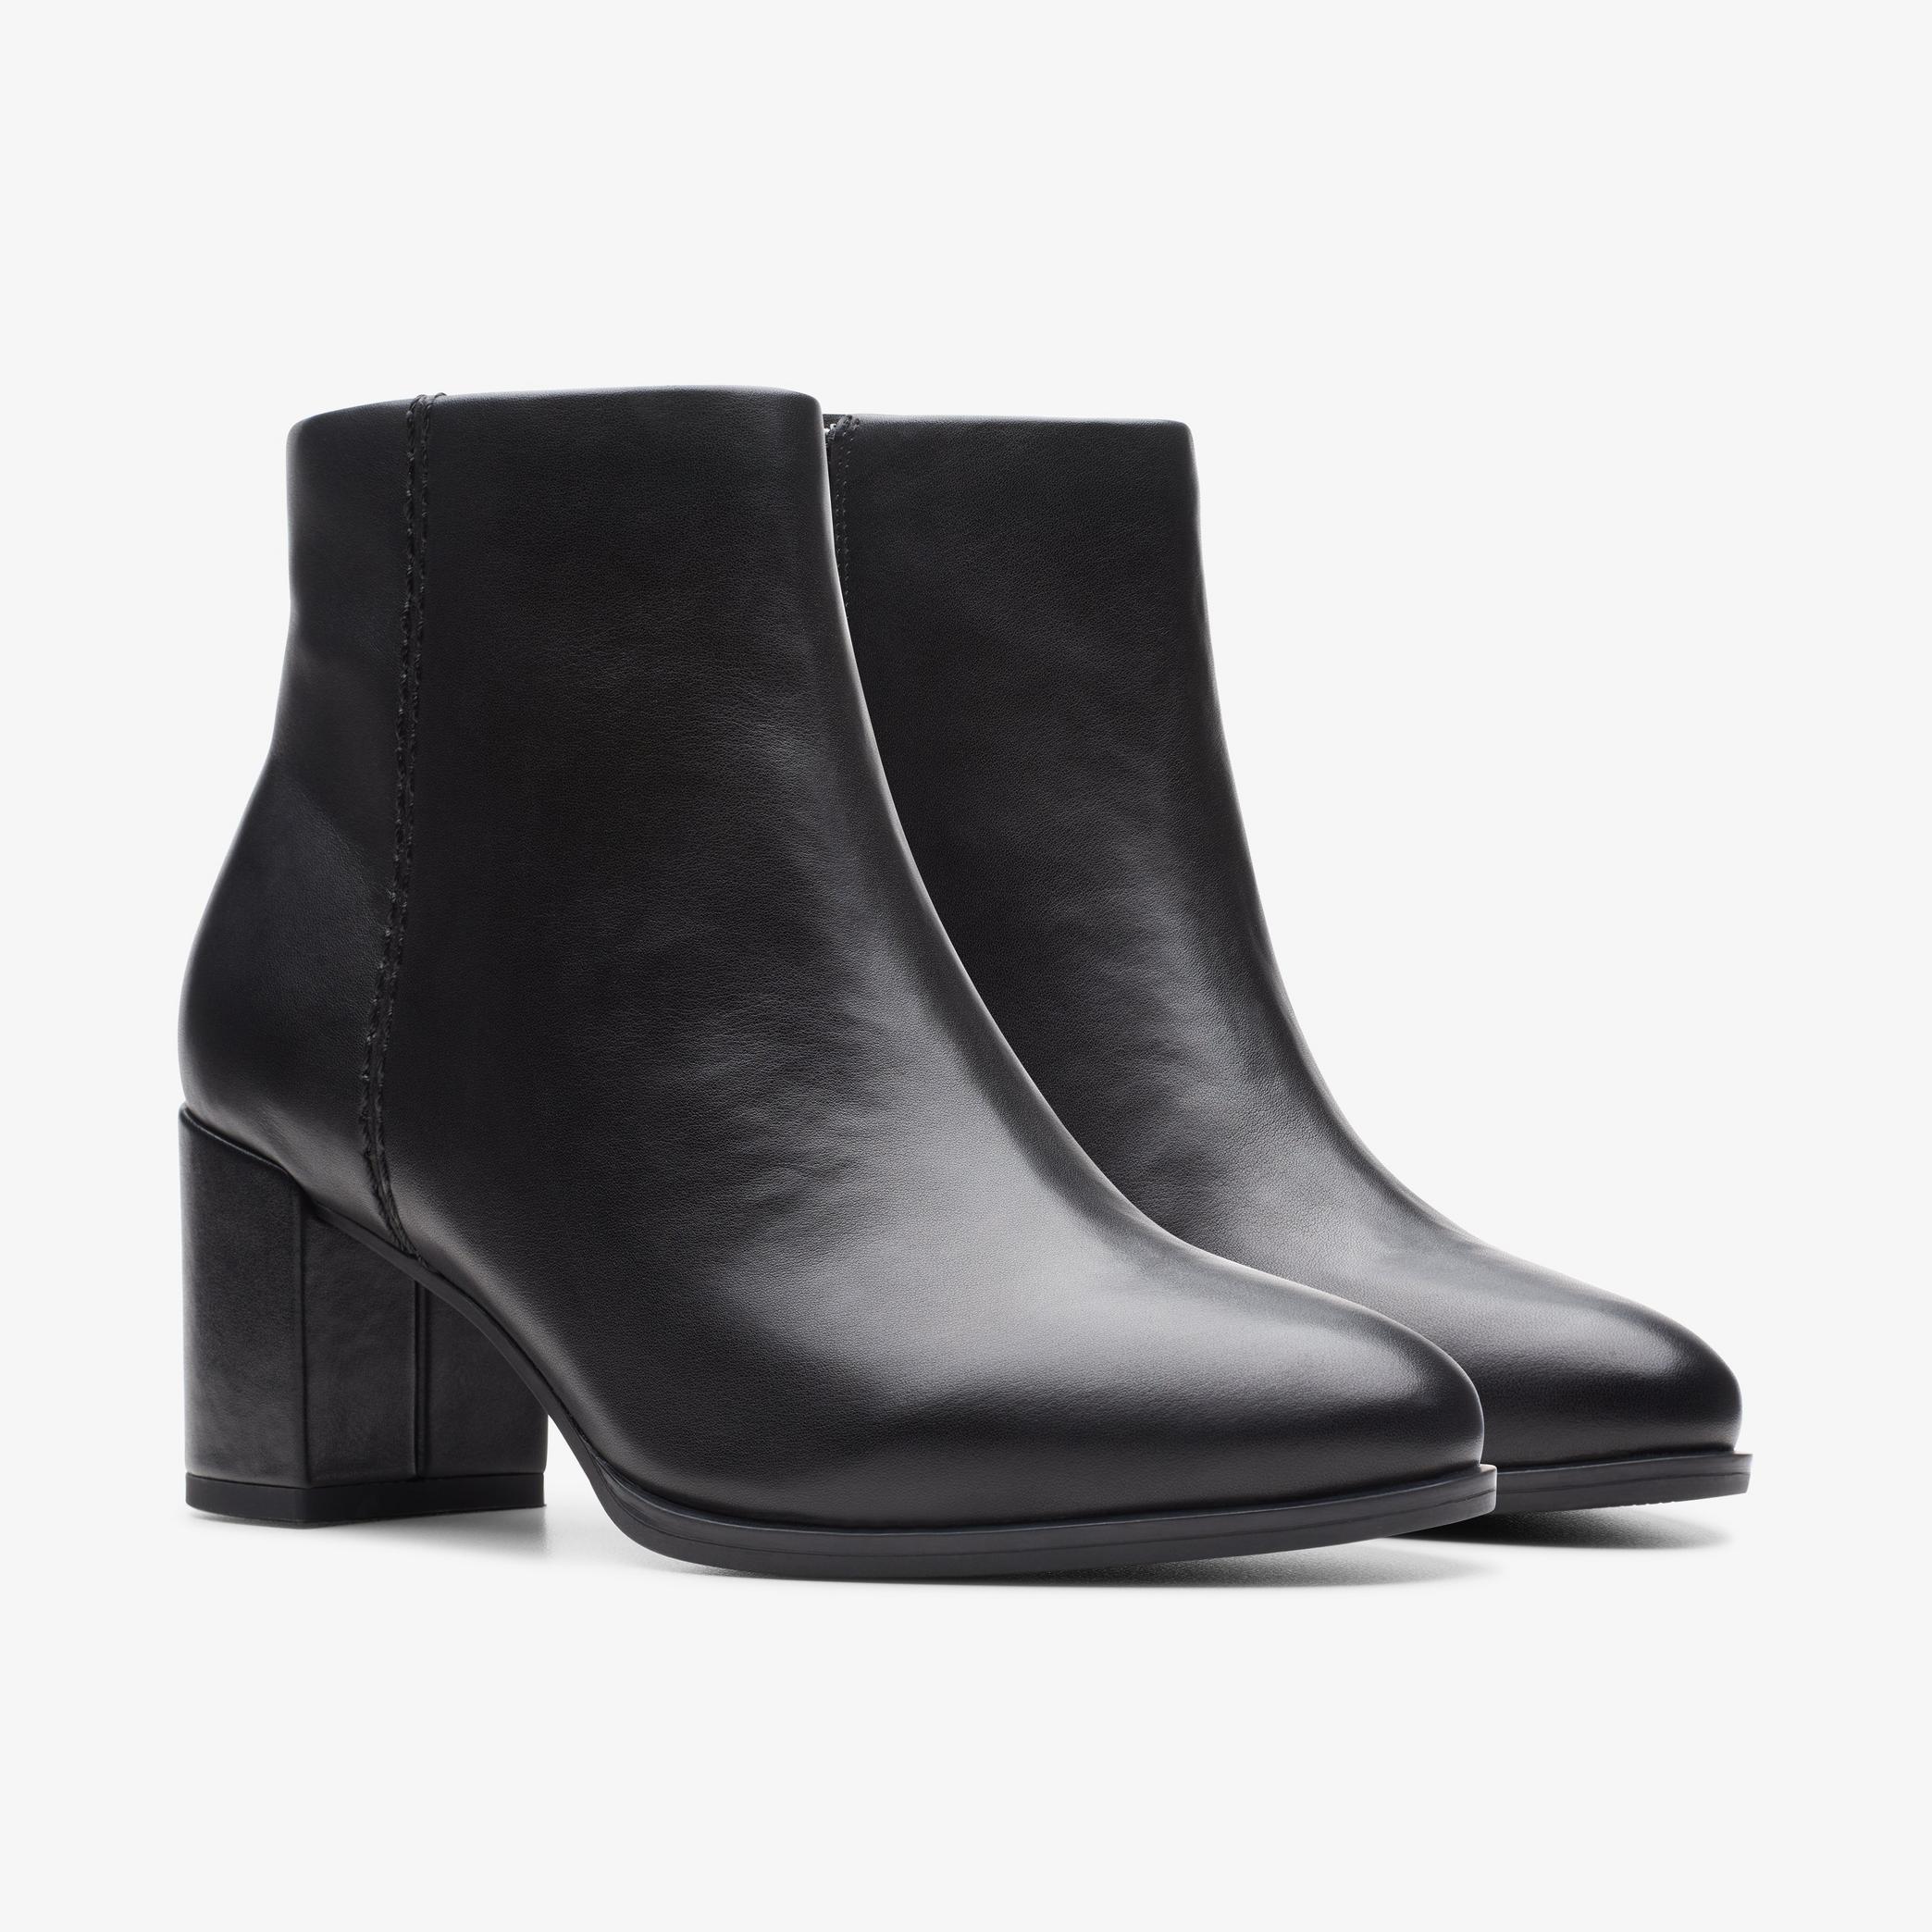 Freva 55 Zip Black Leather Ankle Boots, view 5 of 7